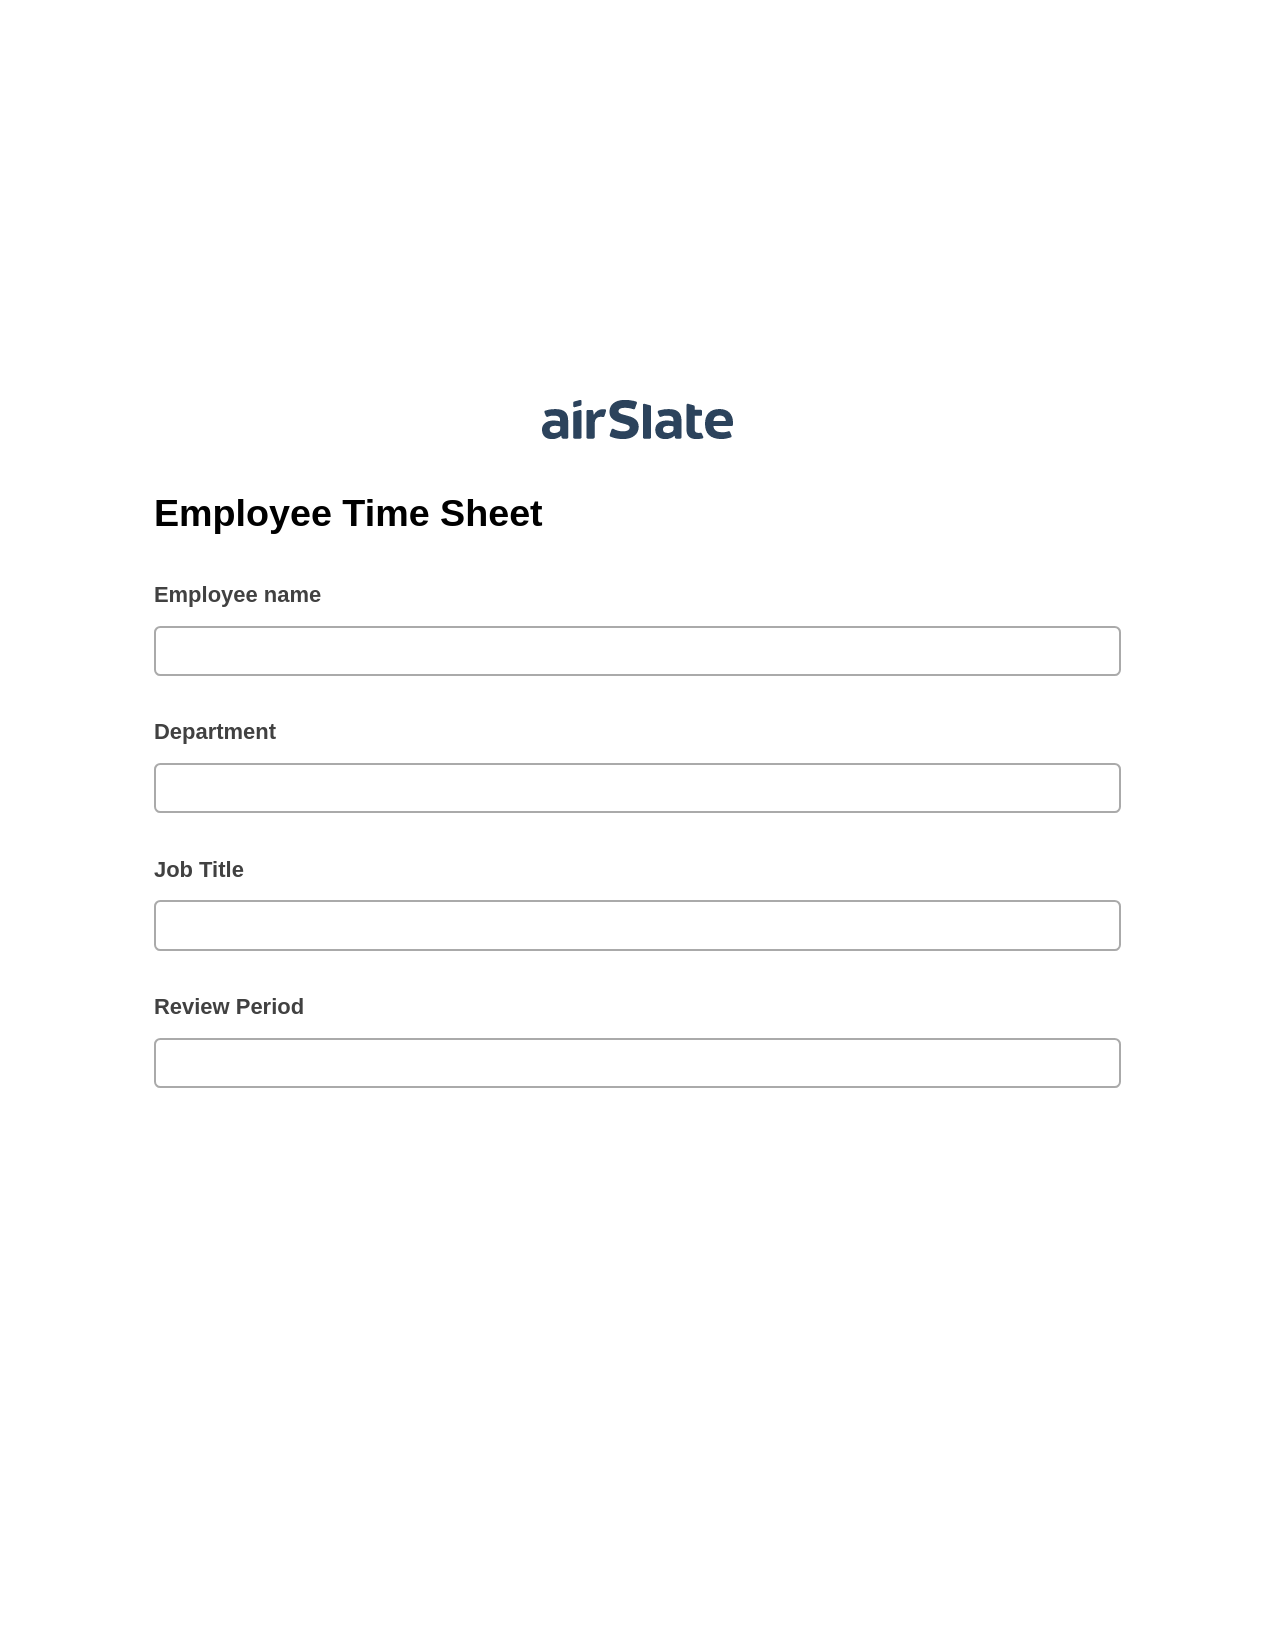 Employee Time Sheet Pre-fill from Salesforce Records Bot, Update MS Dynamics 365 Record Bot, Archive to SharePoint Folder Bot